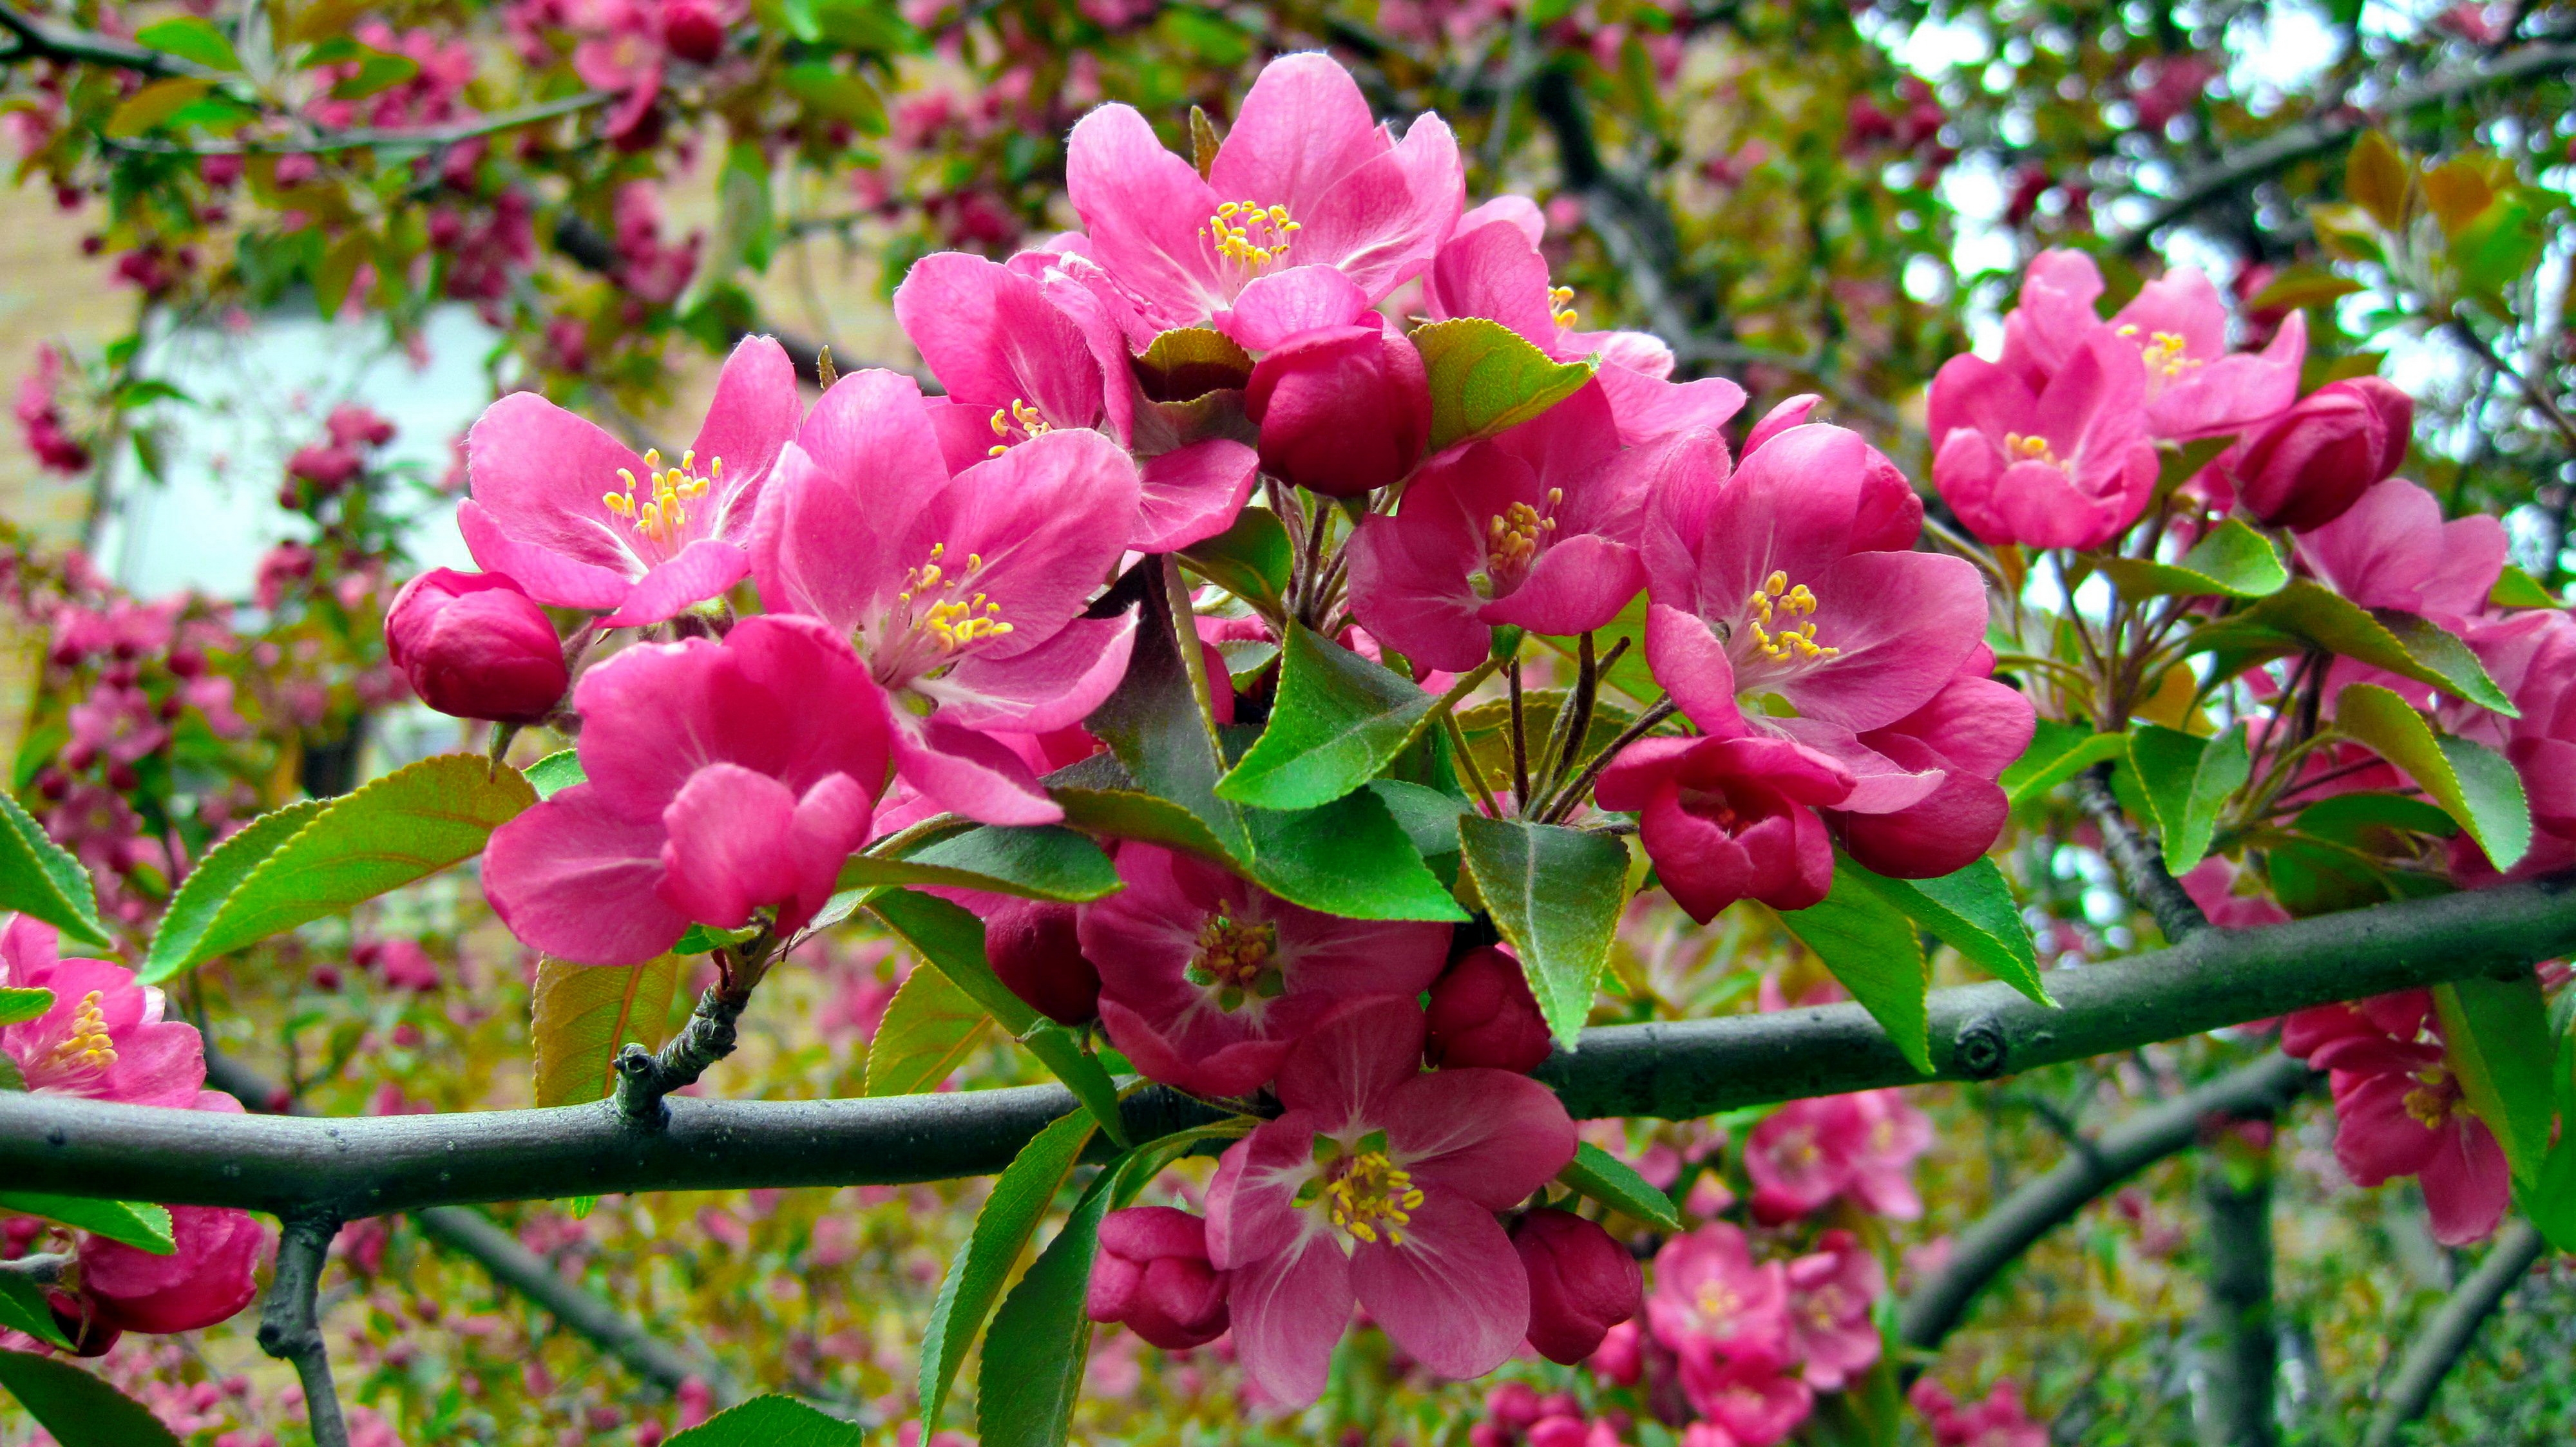 Pink Blossoms 4k Ultra HD Wallpaper | Background Image | 3999x2247 | ID:774050 - Wallpaper Abyss